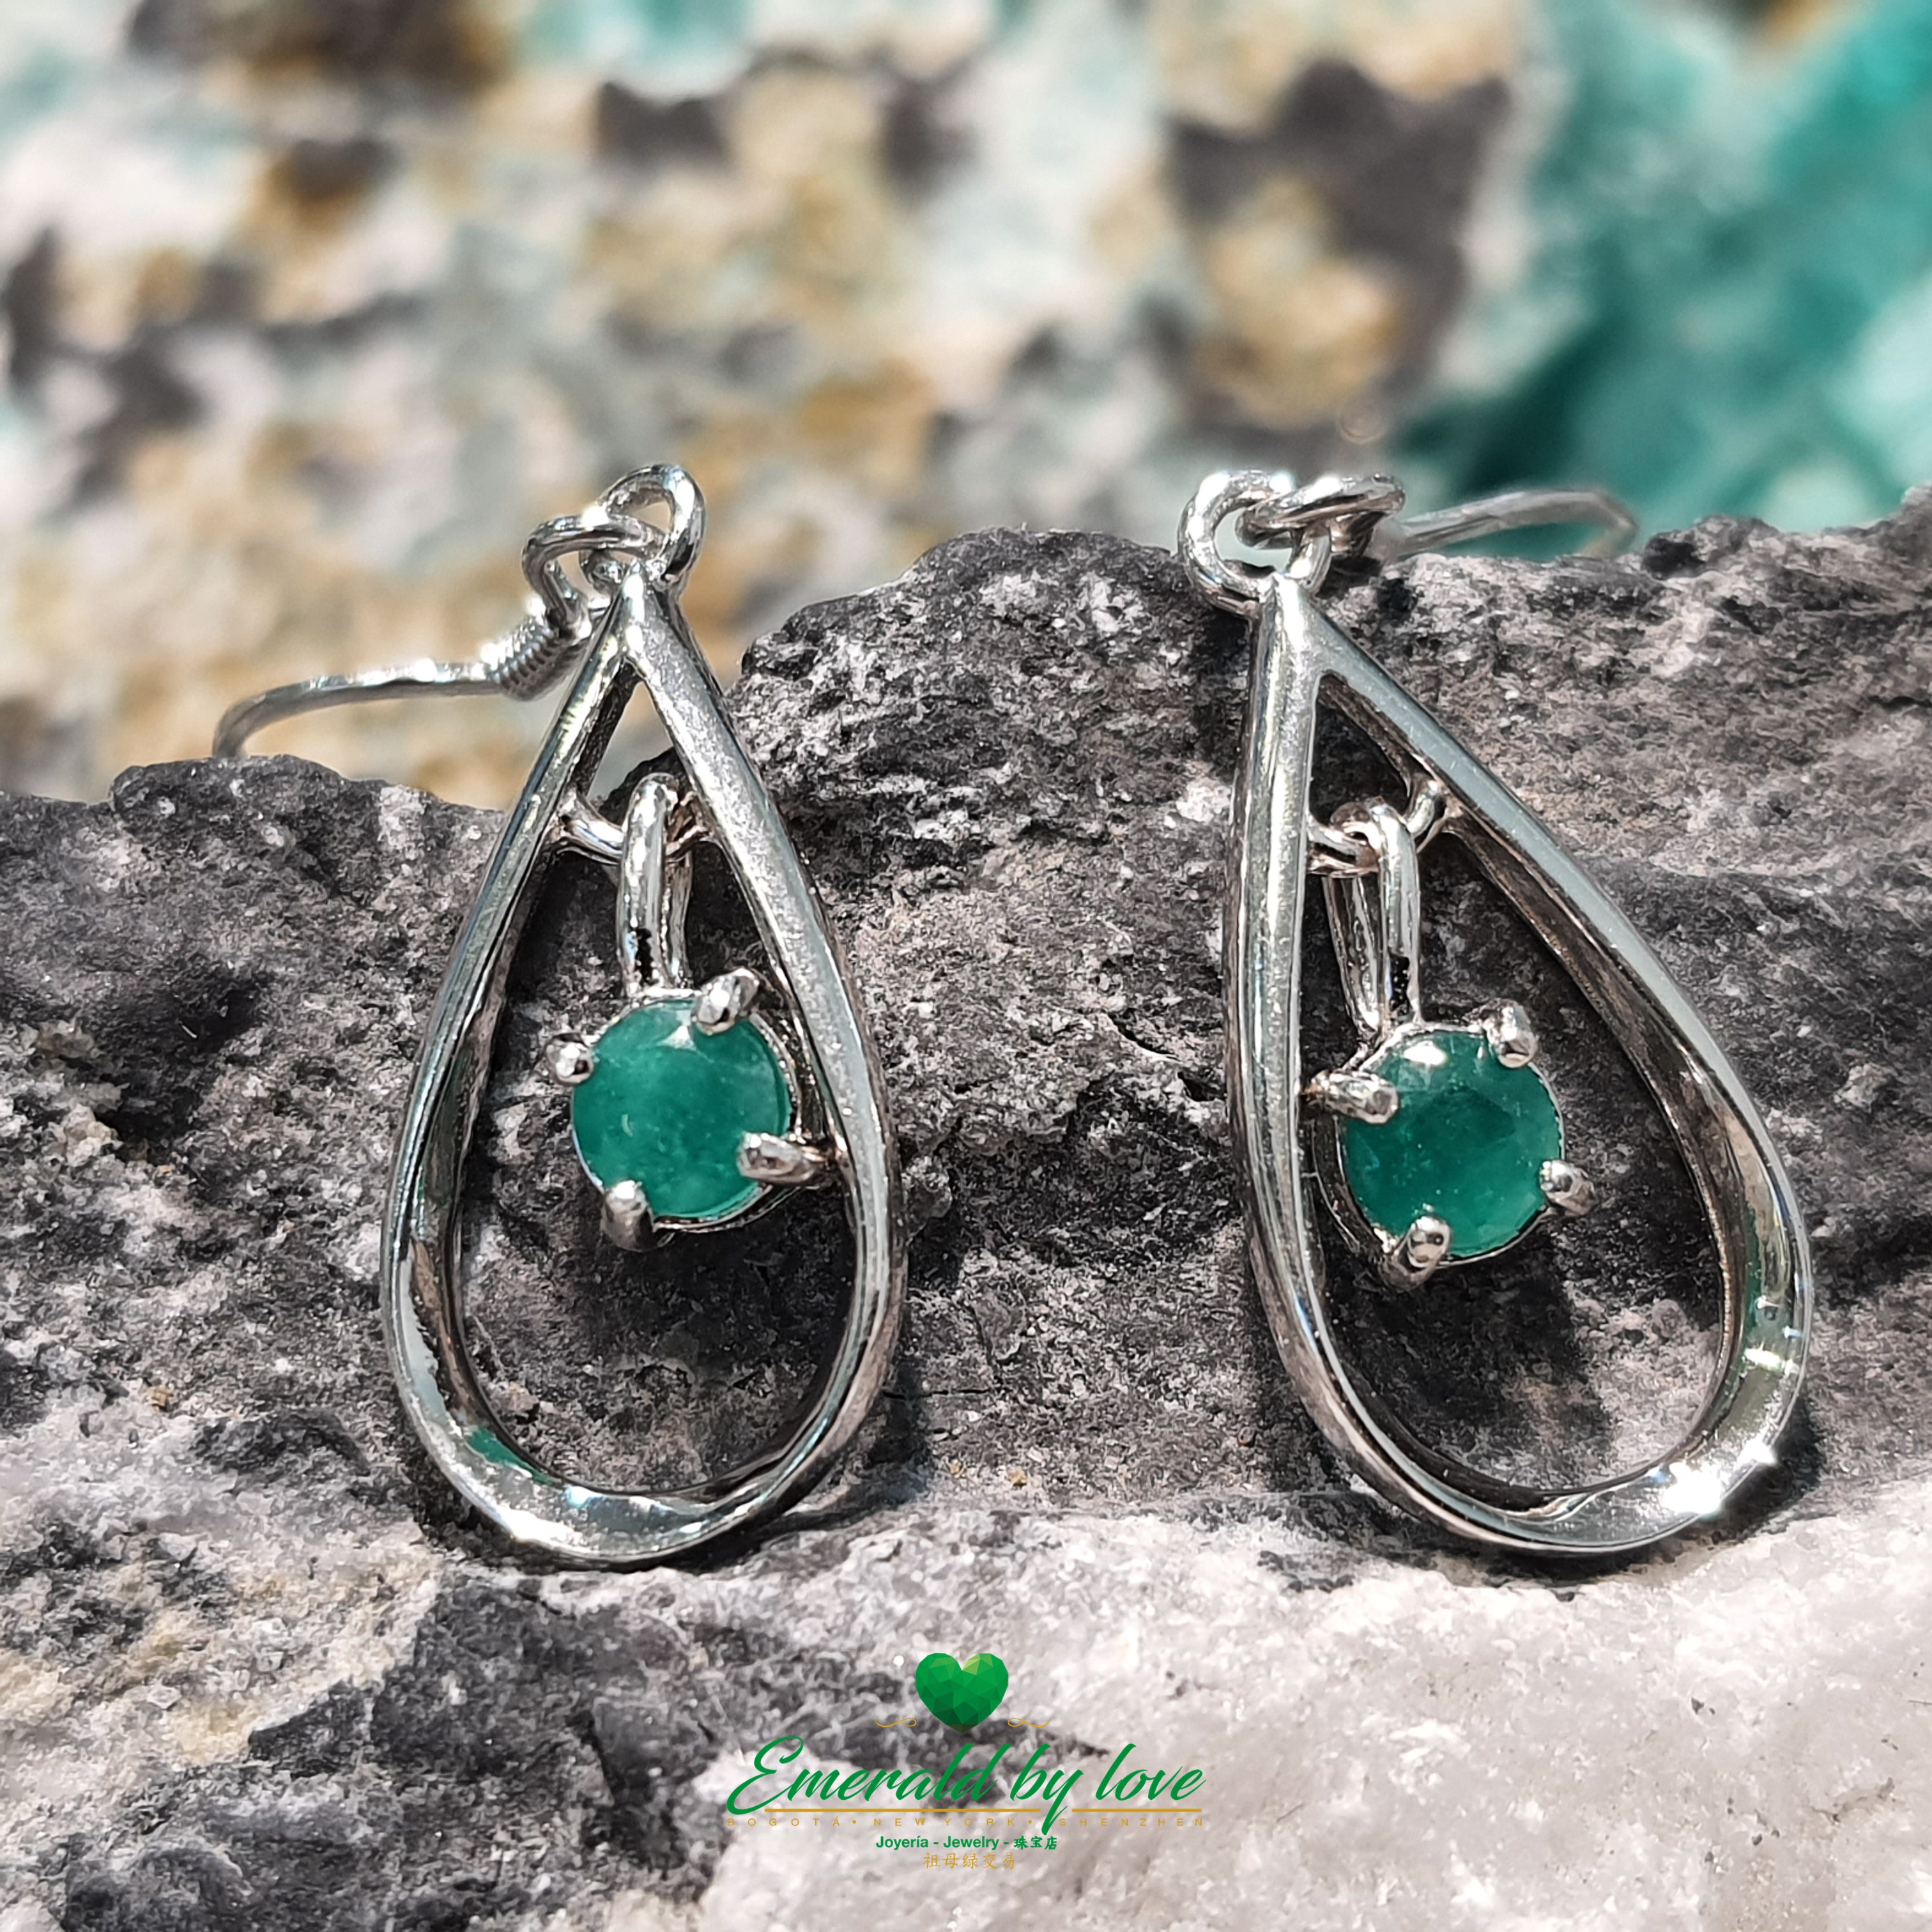 Long Teardrop Design Silver Earrings with Central Round Colombian Emeralds